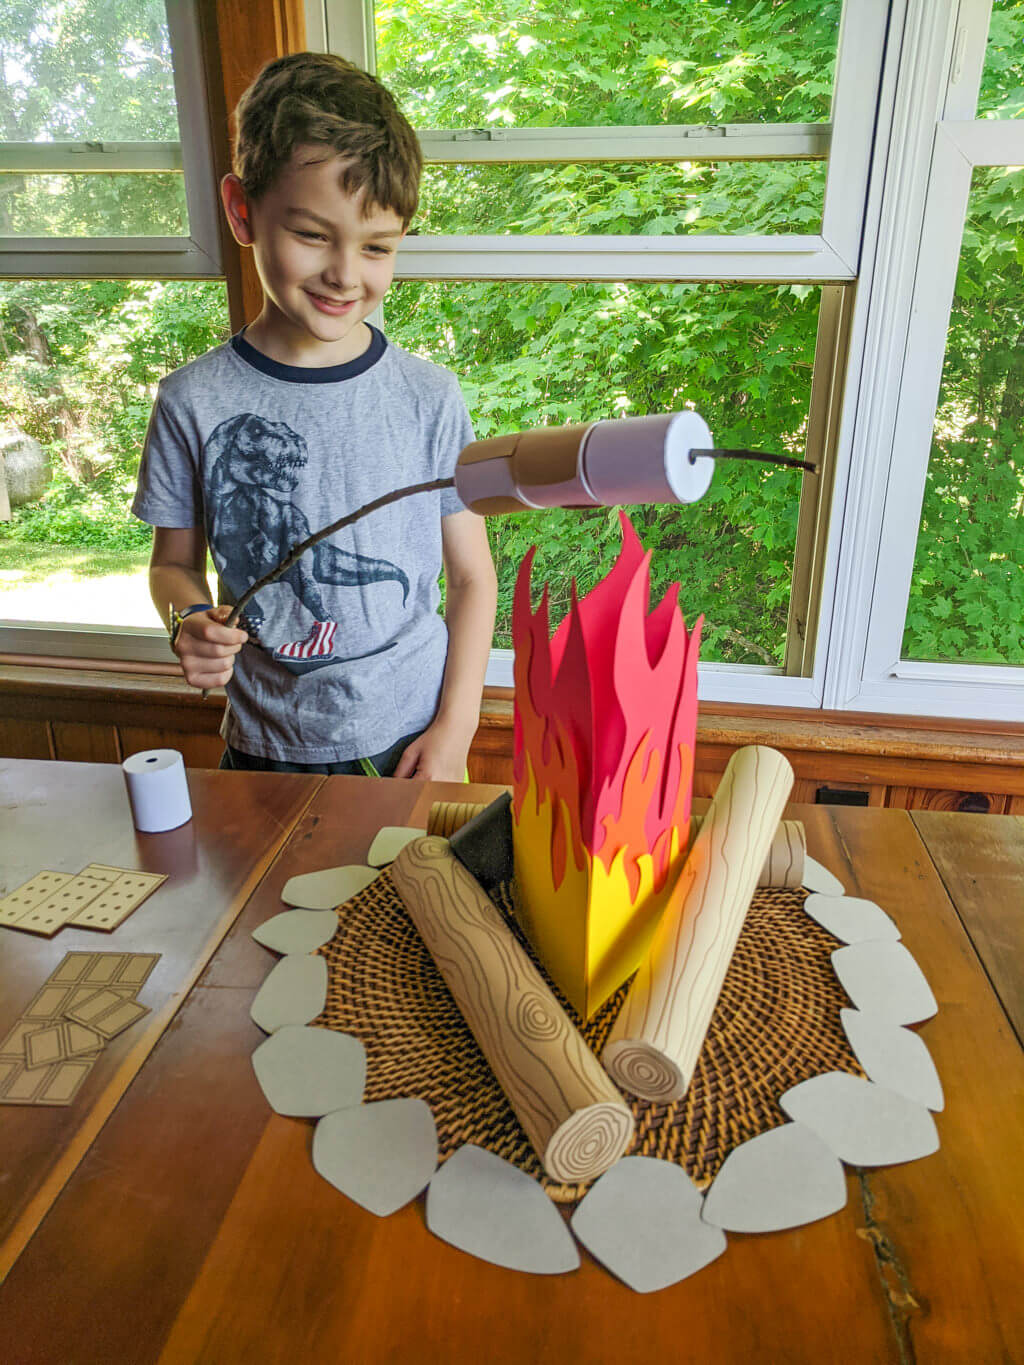 Liam playing pretend with campfire play set Copyright Merriment Design. Do not distribute without written permission.